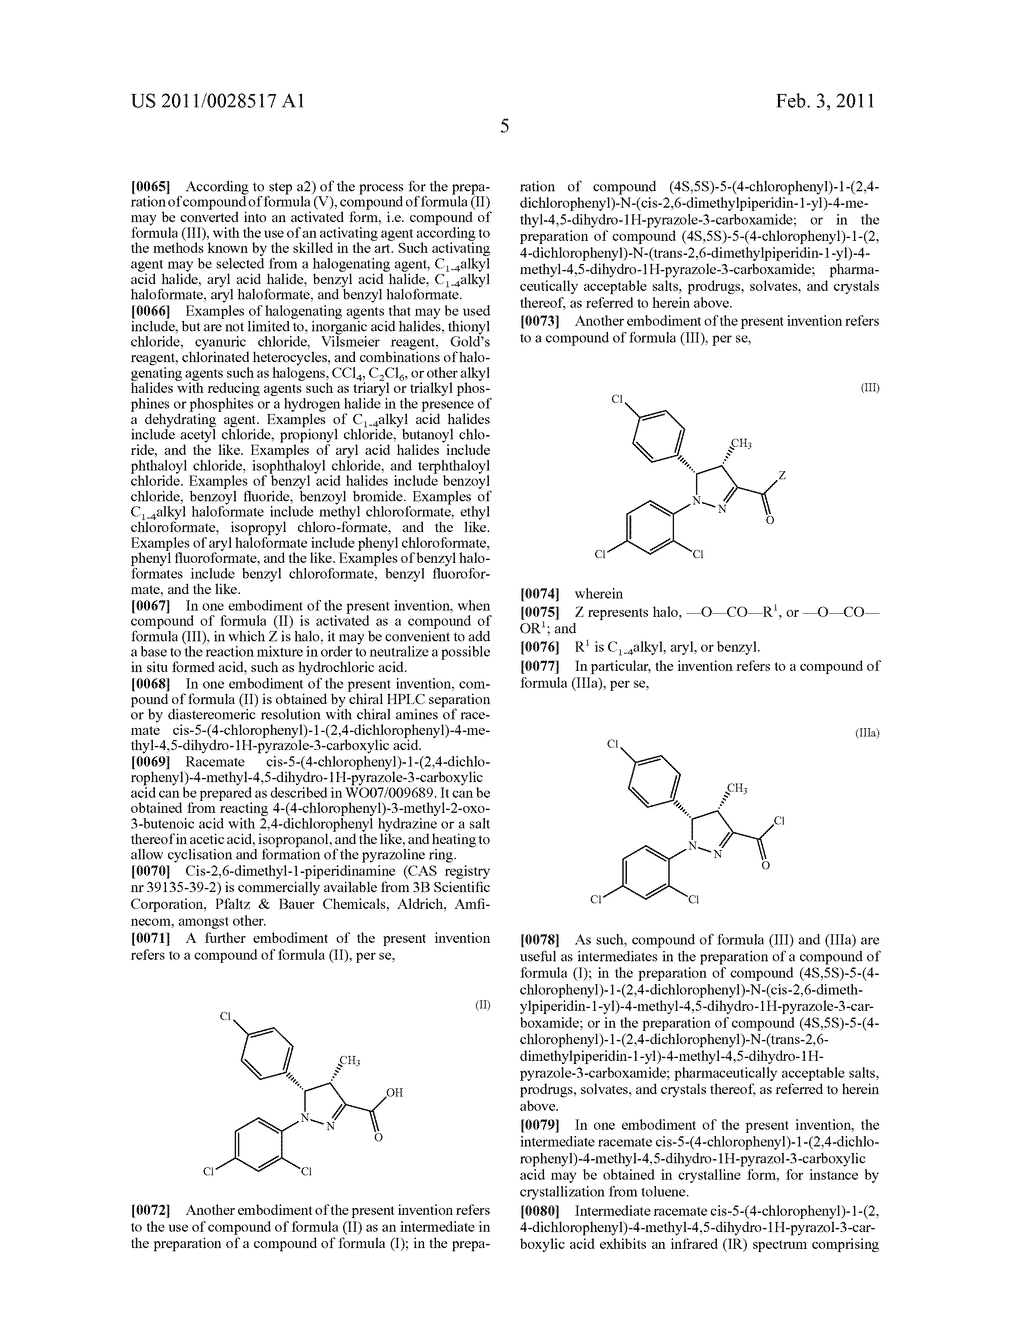 4-METHYL-4,5-DIHYDRO-1H-PYRAZOLE-3-CARBOXAMIDE USEFUL AS A CANNABINOID CB1 NEUTRAL ANTAGONIST - diagram, schematic, and image 13